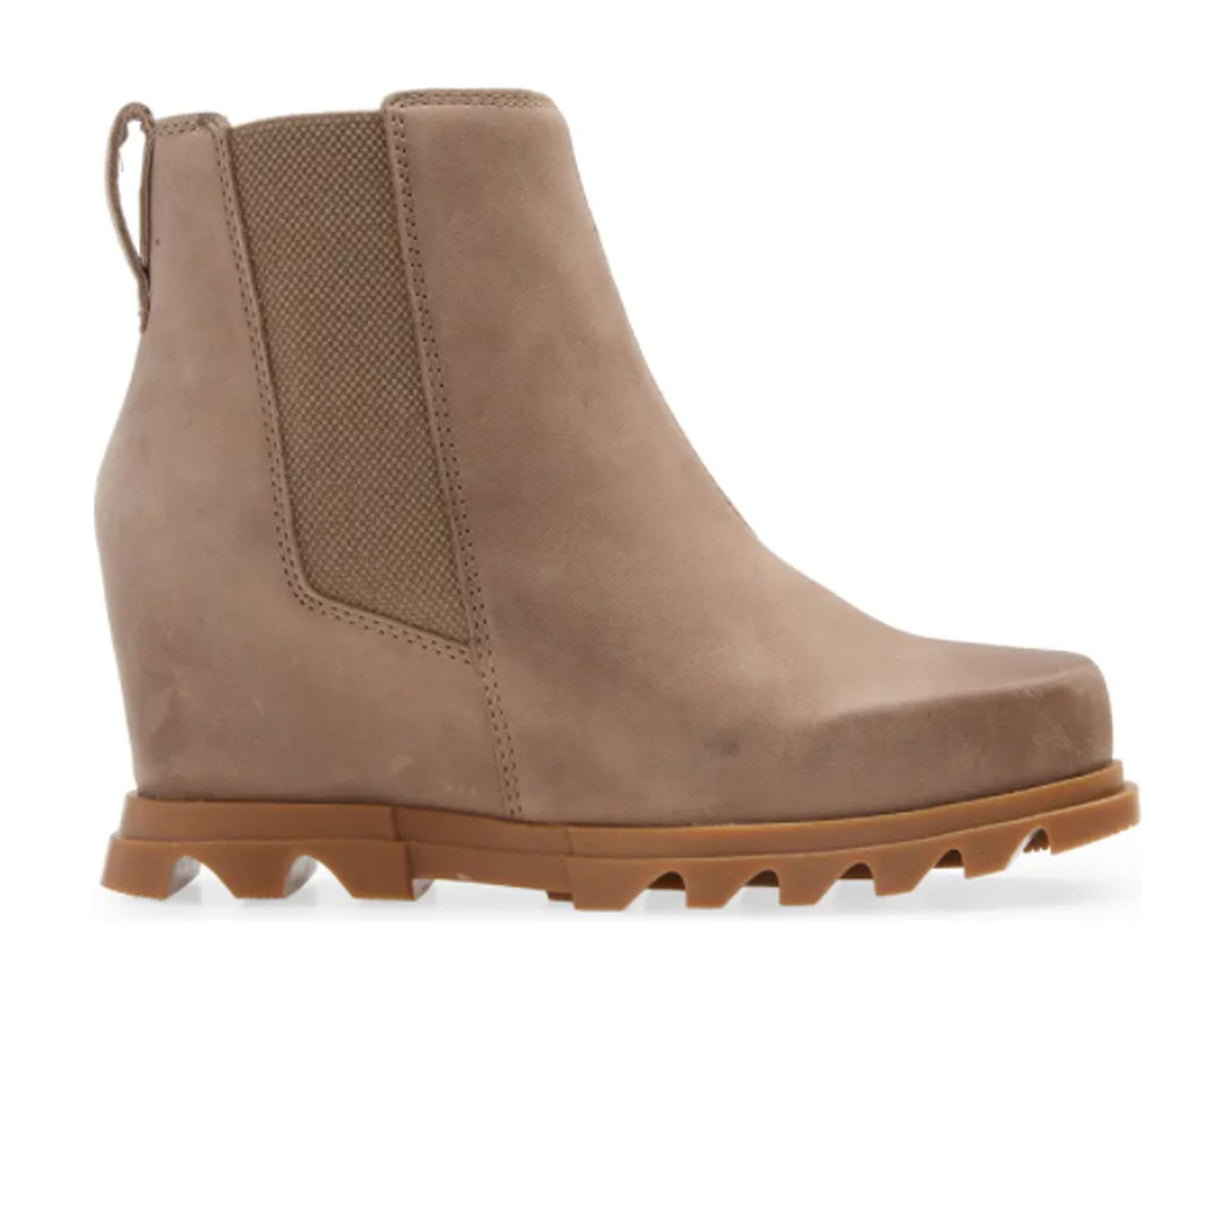 Sorel Joan of Arctic Wedge III Chelsea (Women) - Omega Taupe/Wet Sand Boots - Fashion - Wedge - The Heel Shoe Fitters